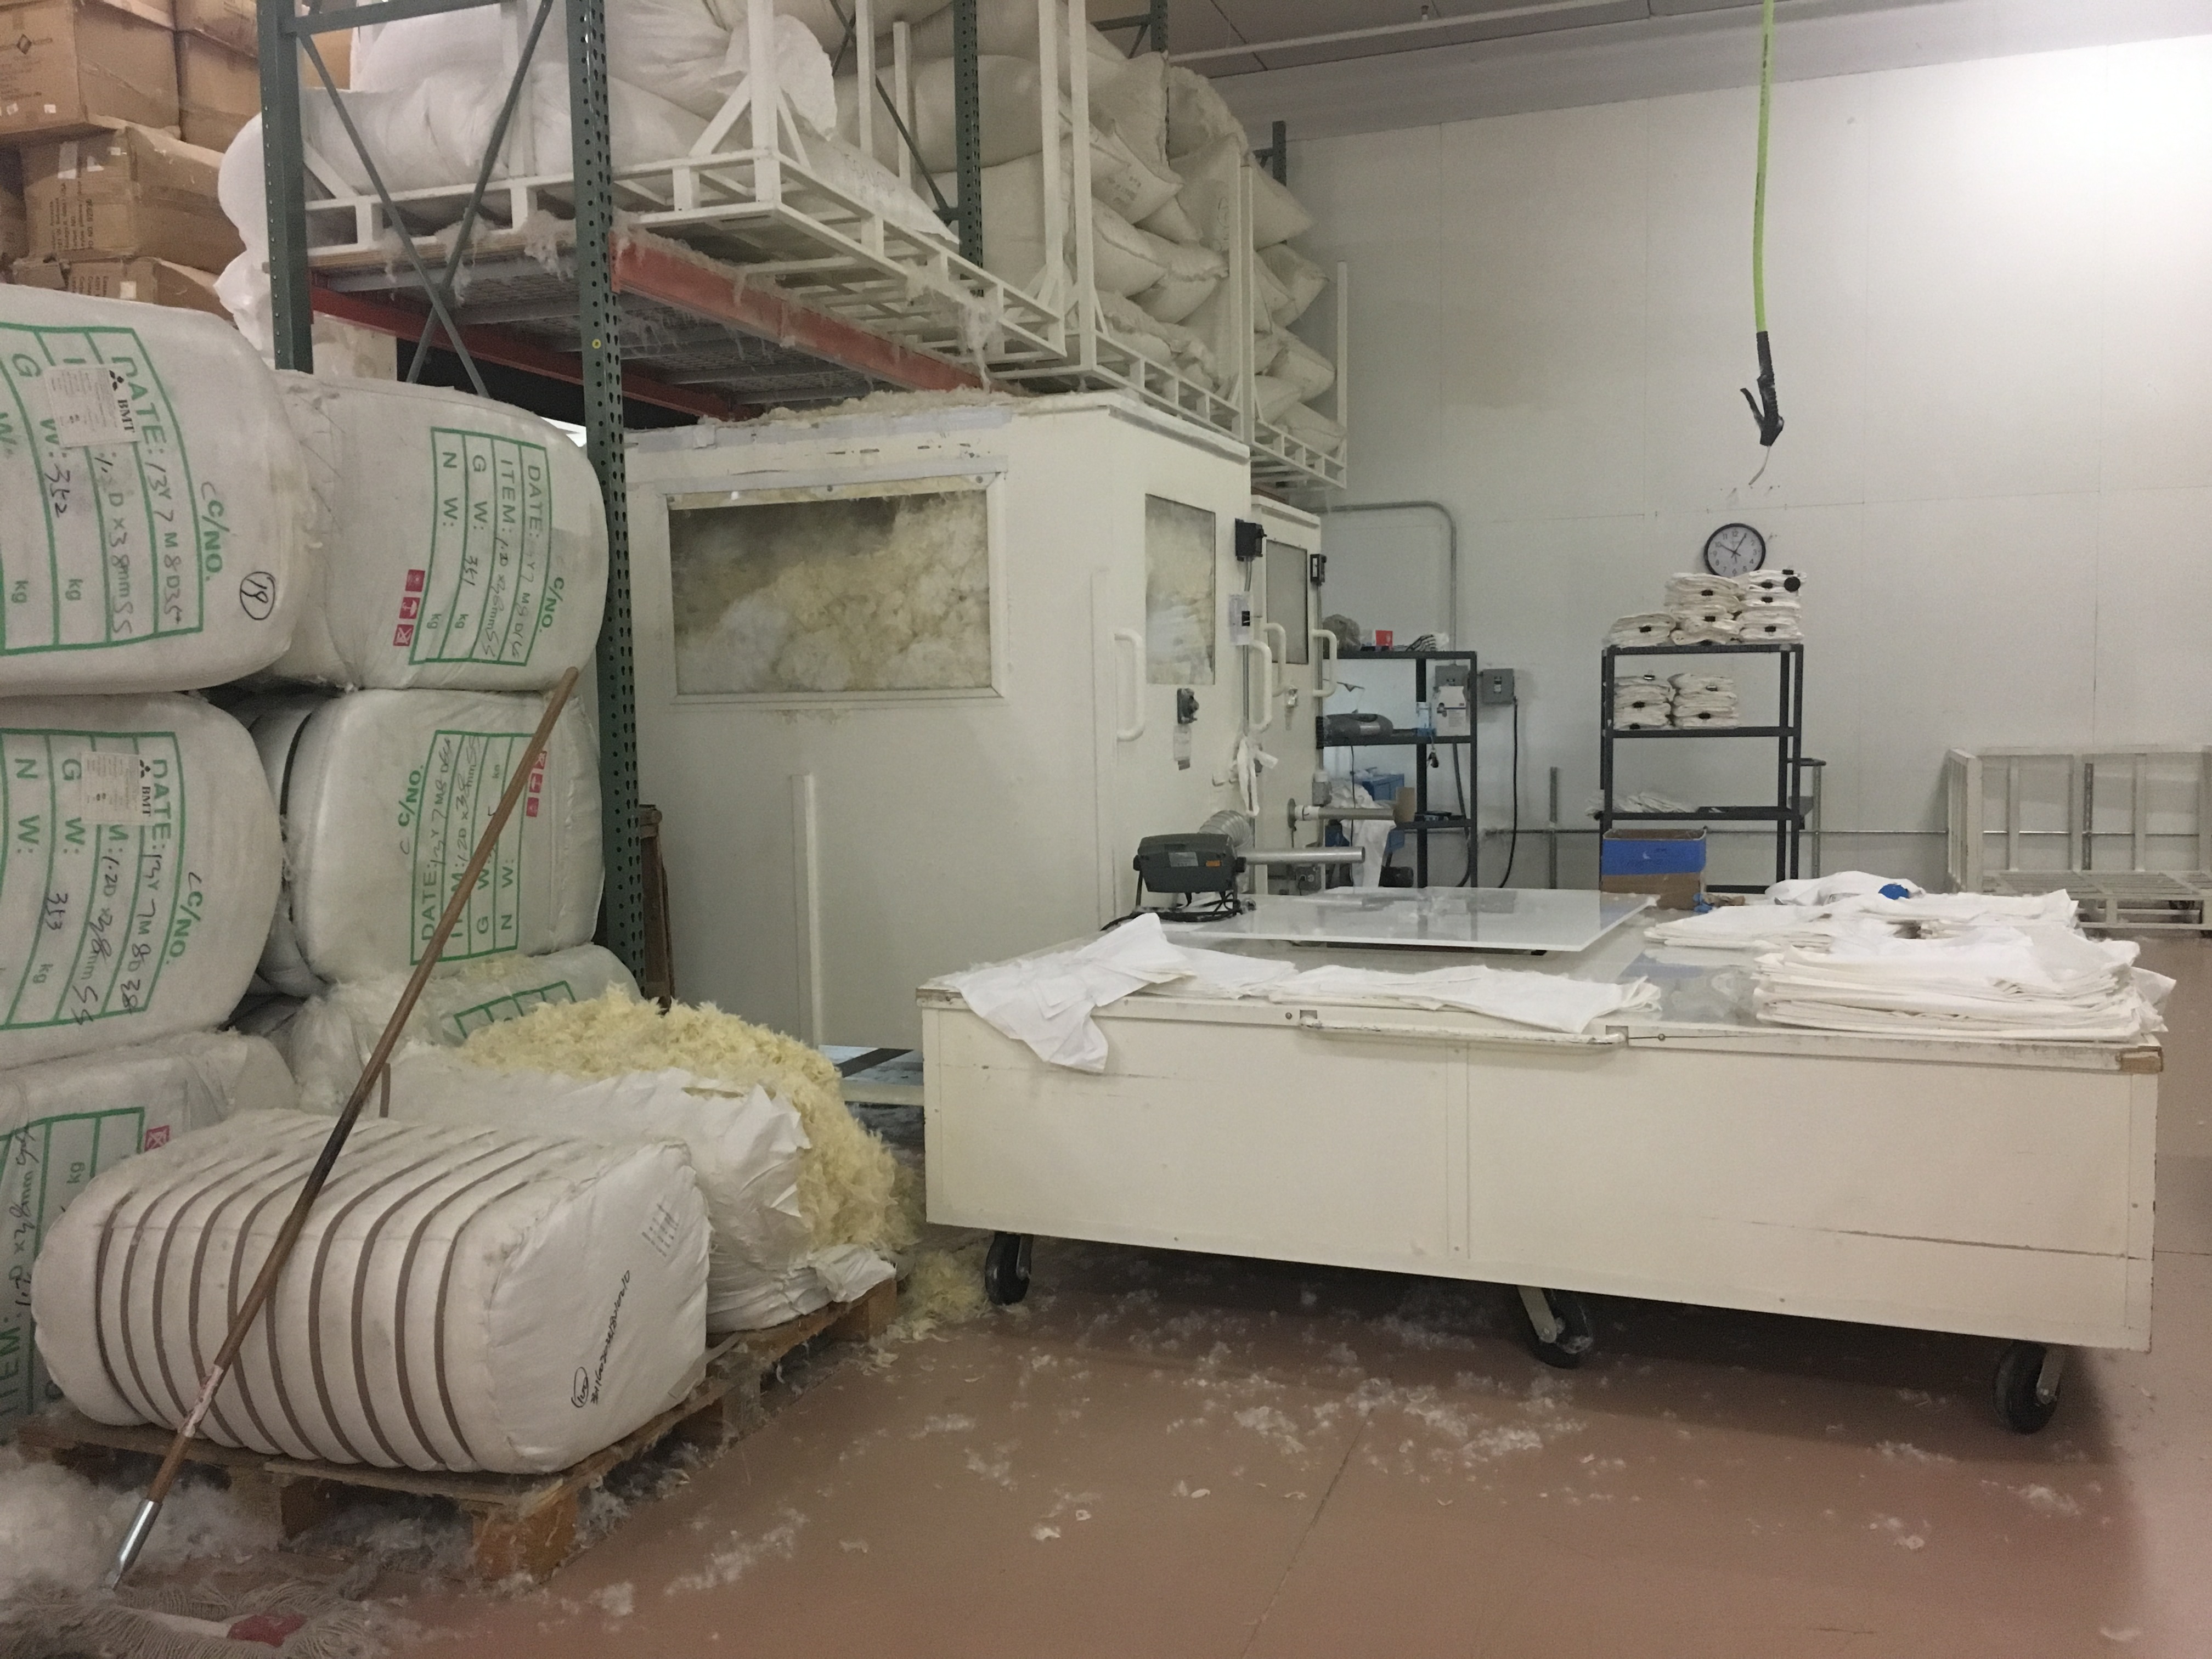 Interior of Eastern Accents facility's down fluffing machine